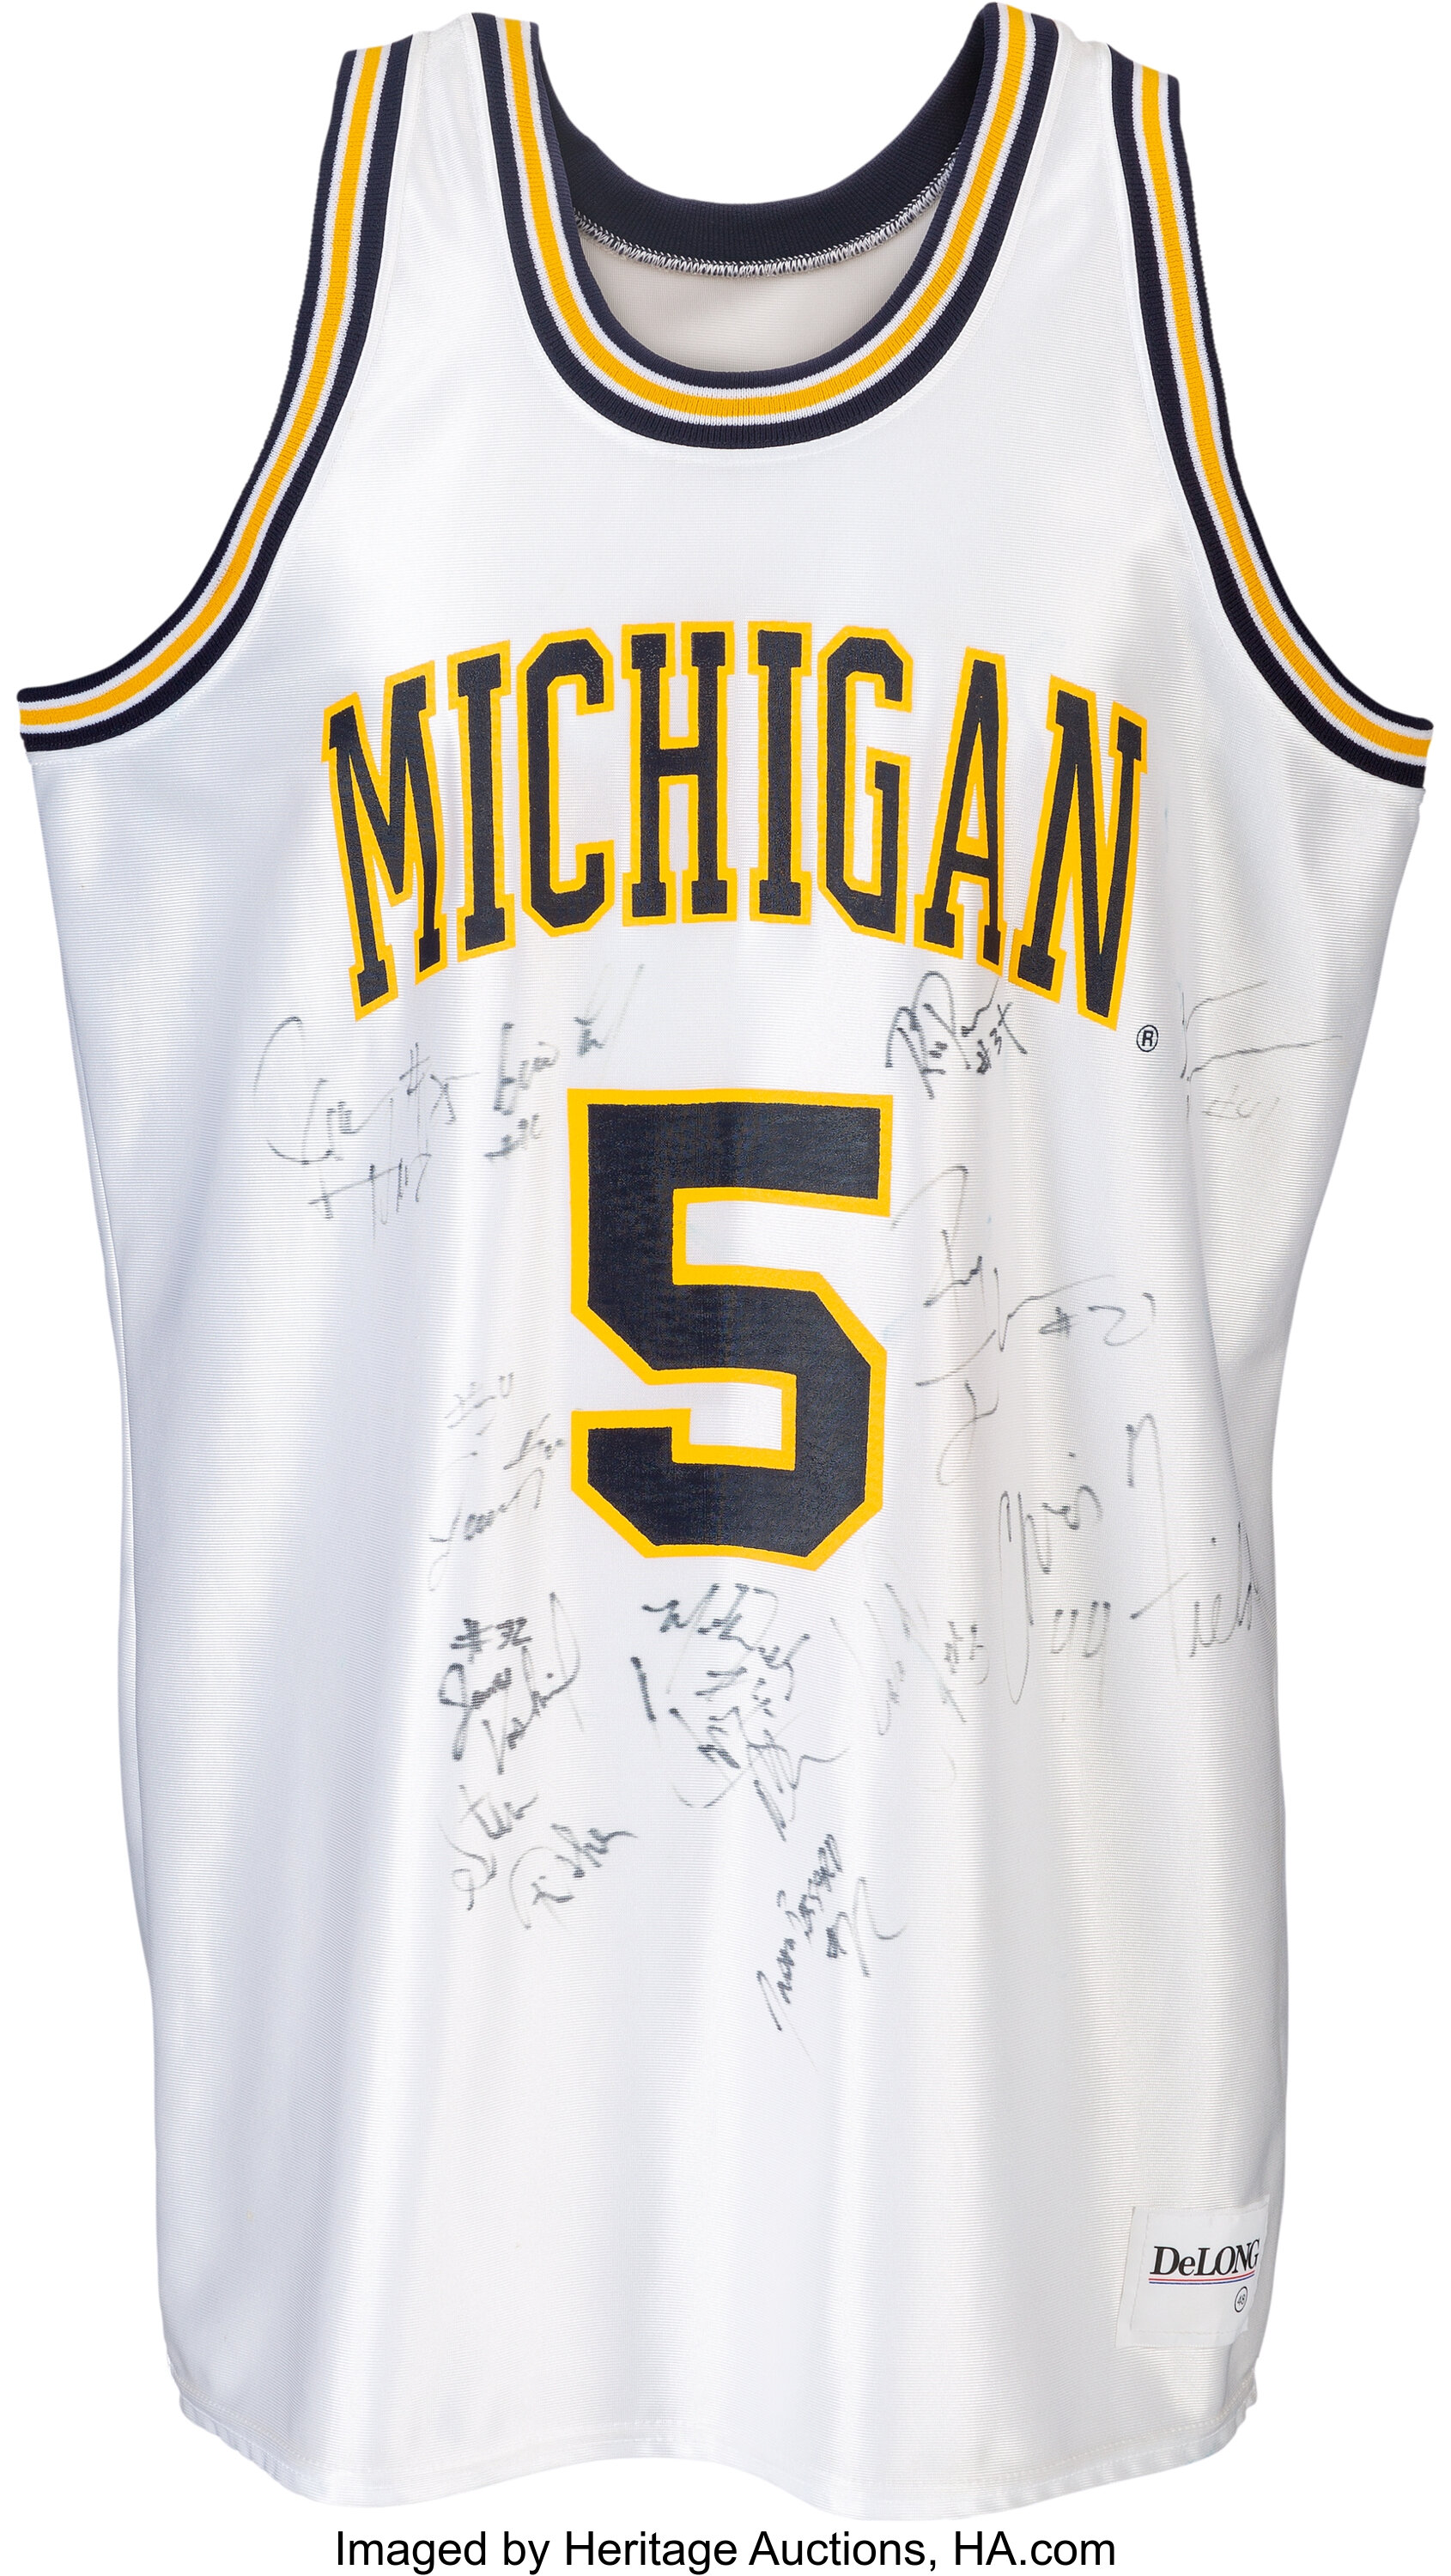 Circa 1991 Michigan Wolverines Team Signed Jersey - The Fab